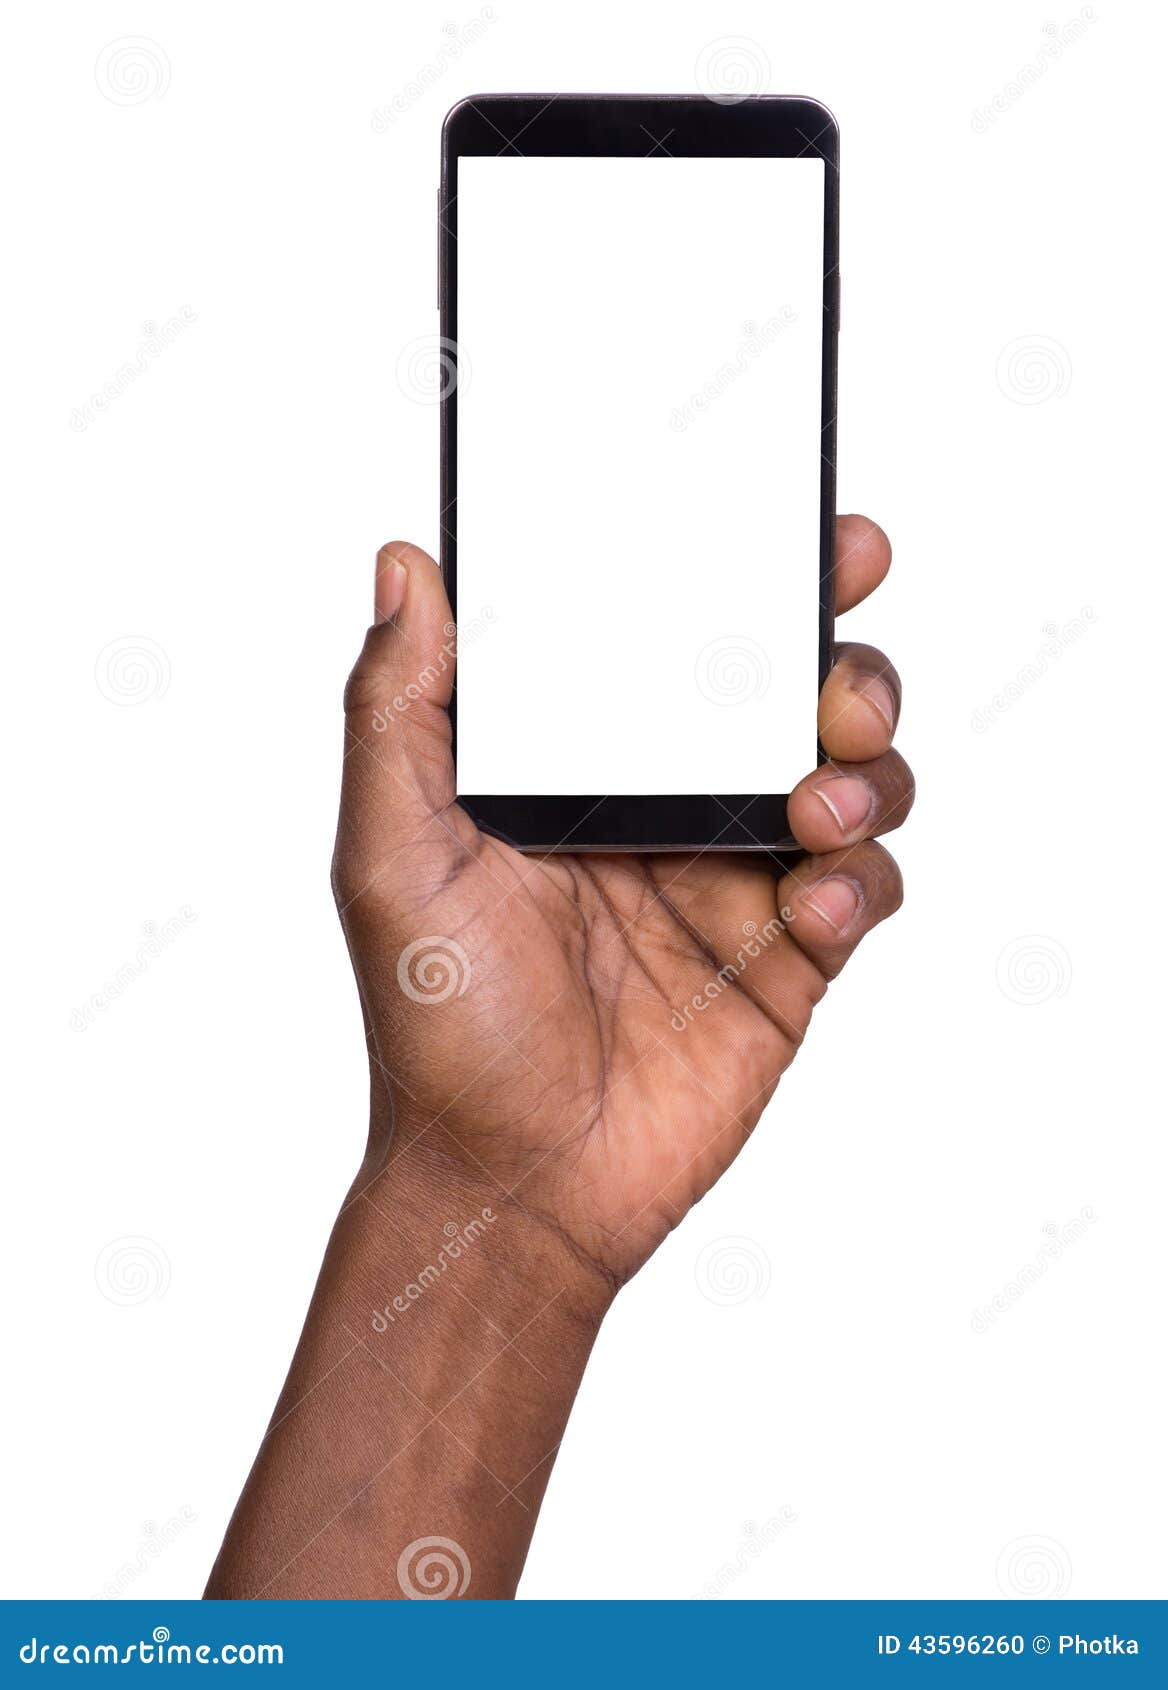 hand holding mobile smart phone with blank screen